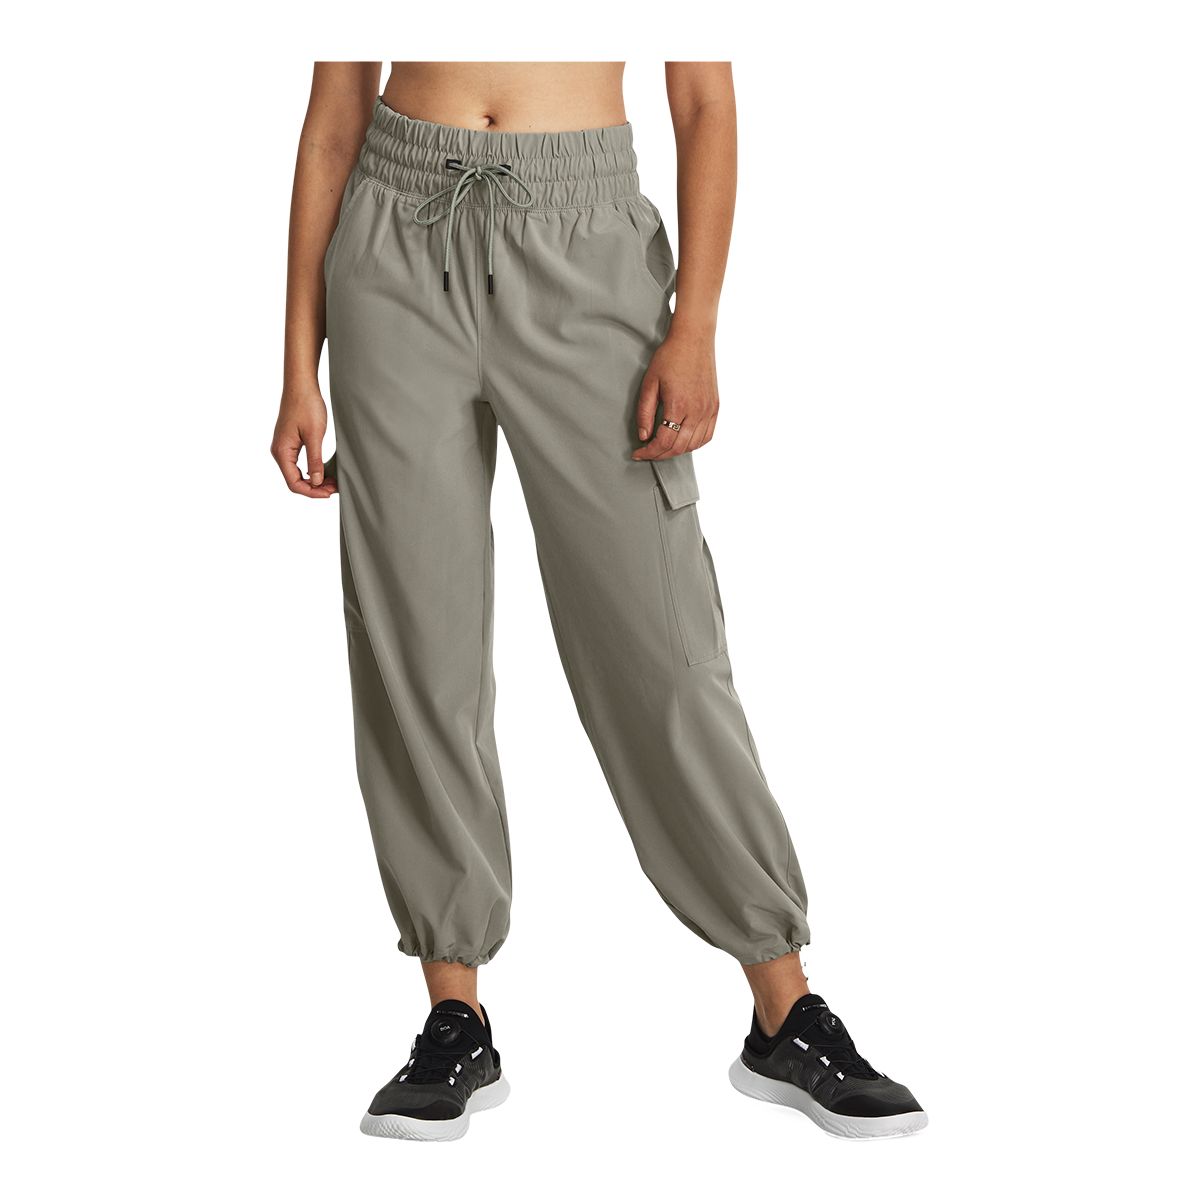 Under Armour Women's Sport Woven Pants Review With Try On 